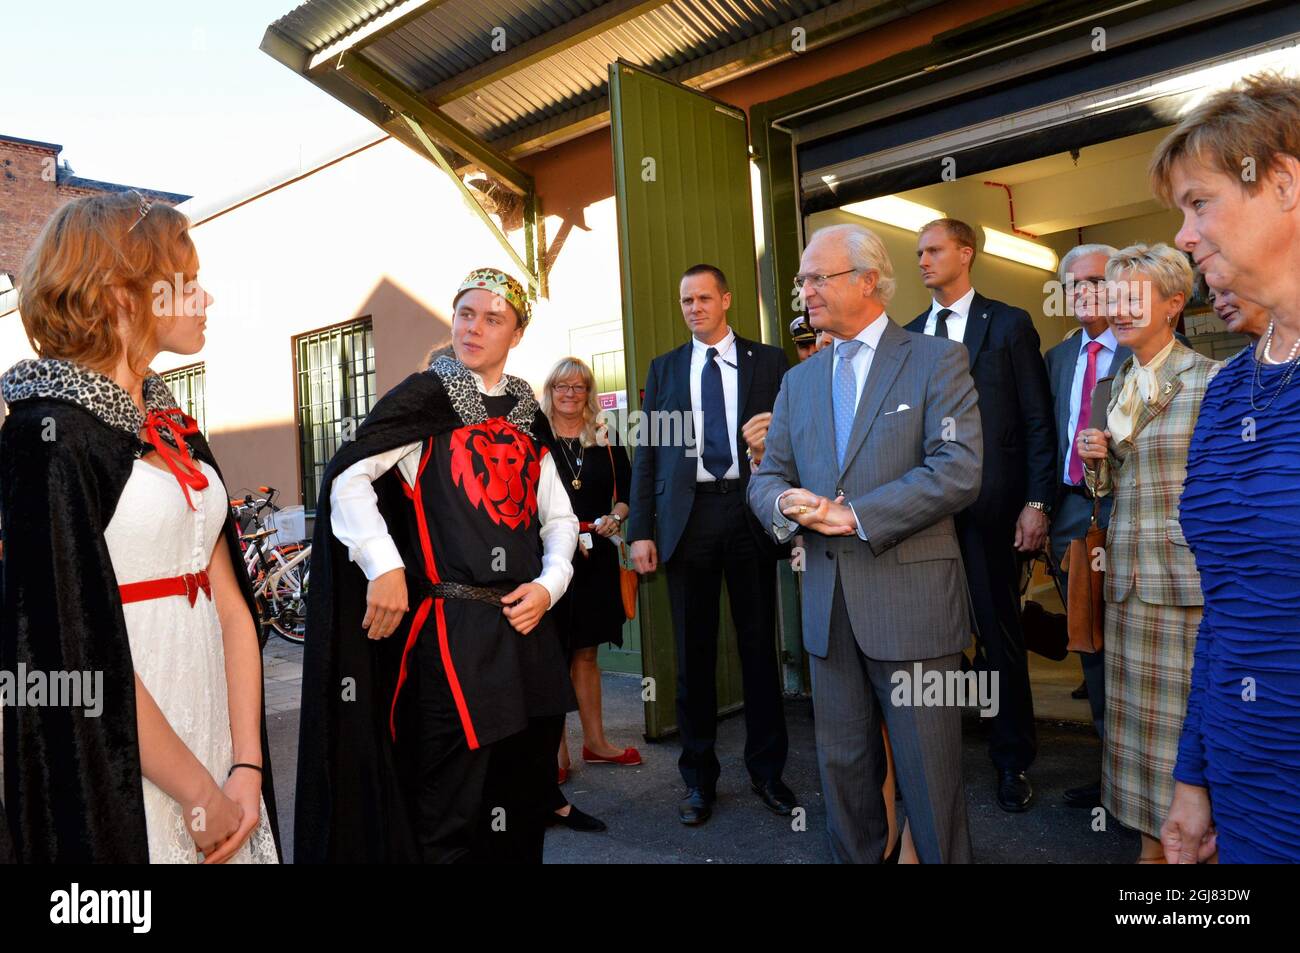 NORRKOPING 20130903 King Carl Gustaf and Queen Silvia are seen welcomed to the Printed Electronics Arena in the city of Norrkoping, Sweden, September 3, 2013. The visit is a part of the Kings ongoing 40 year anniversary on the throne. Foto:Jonas Ekstromer / SCANPIX / Kod 10030  Stock Photo